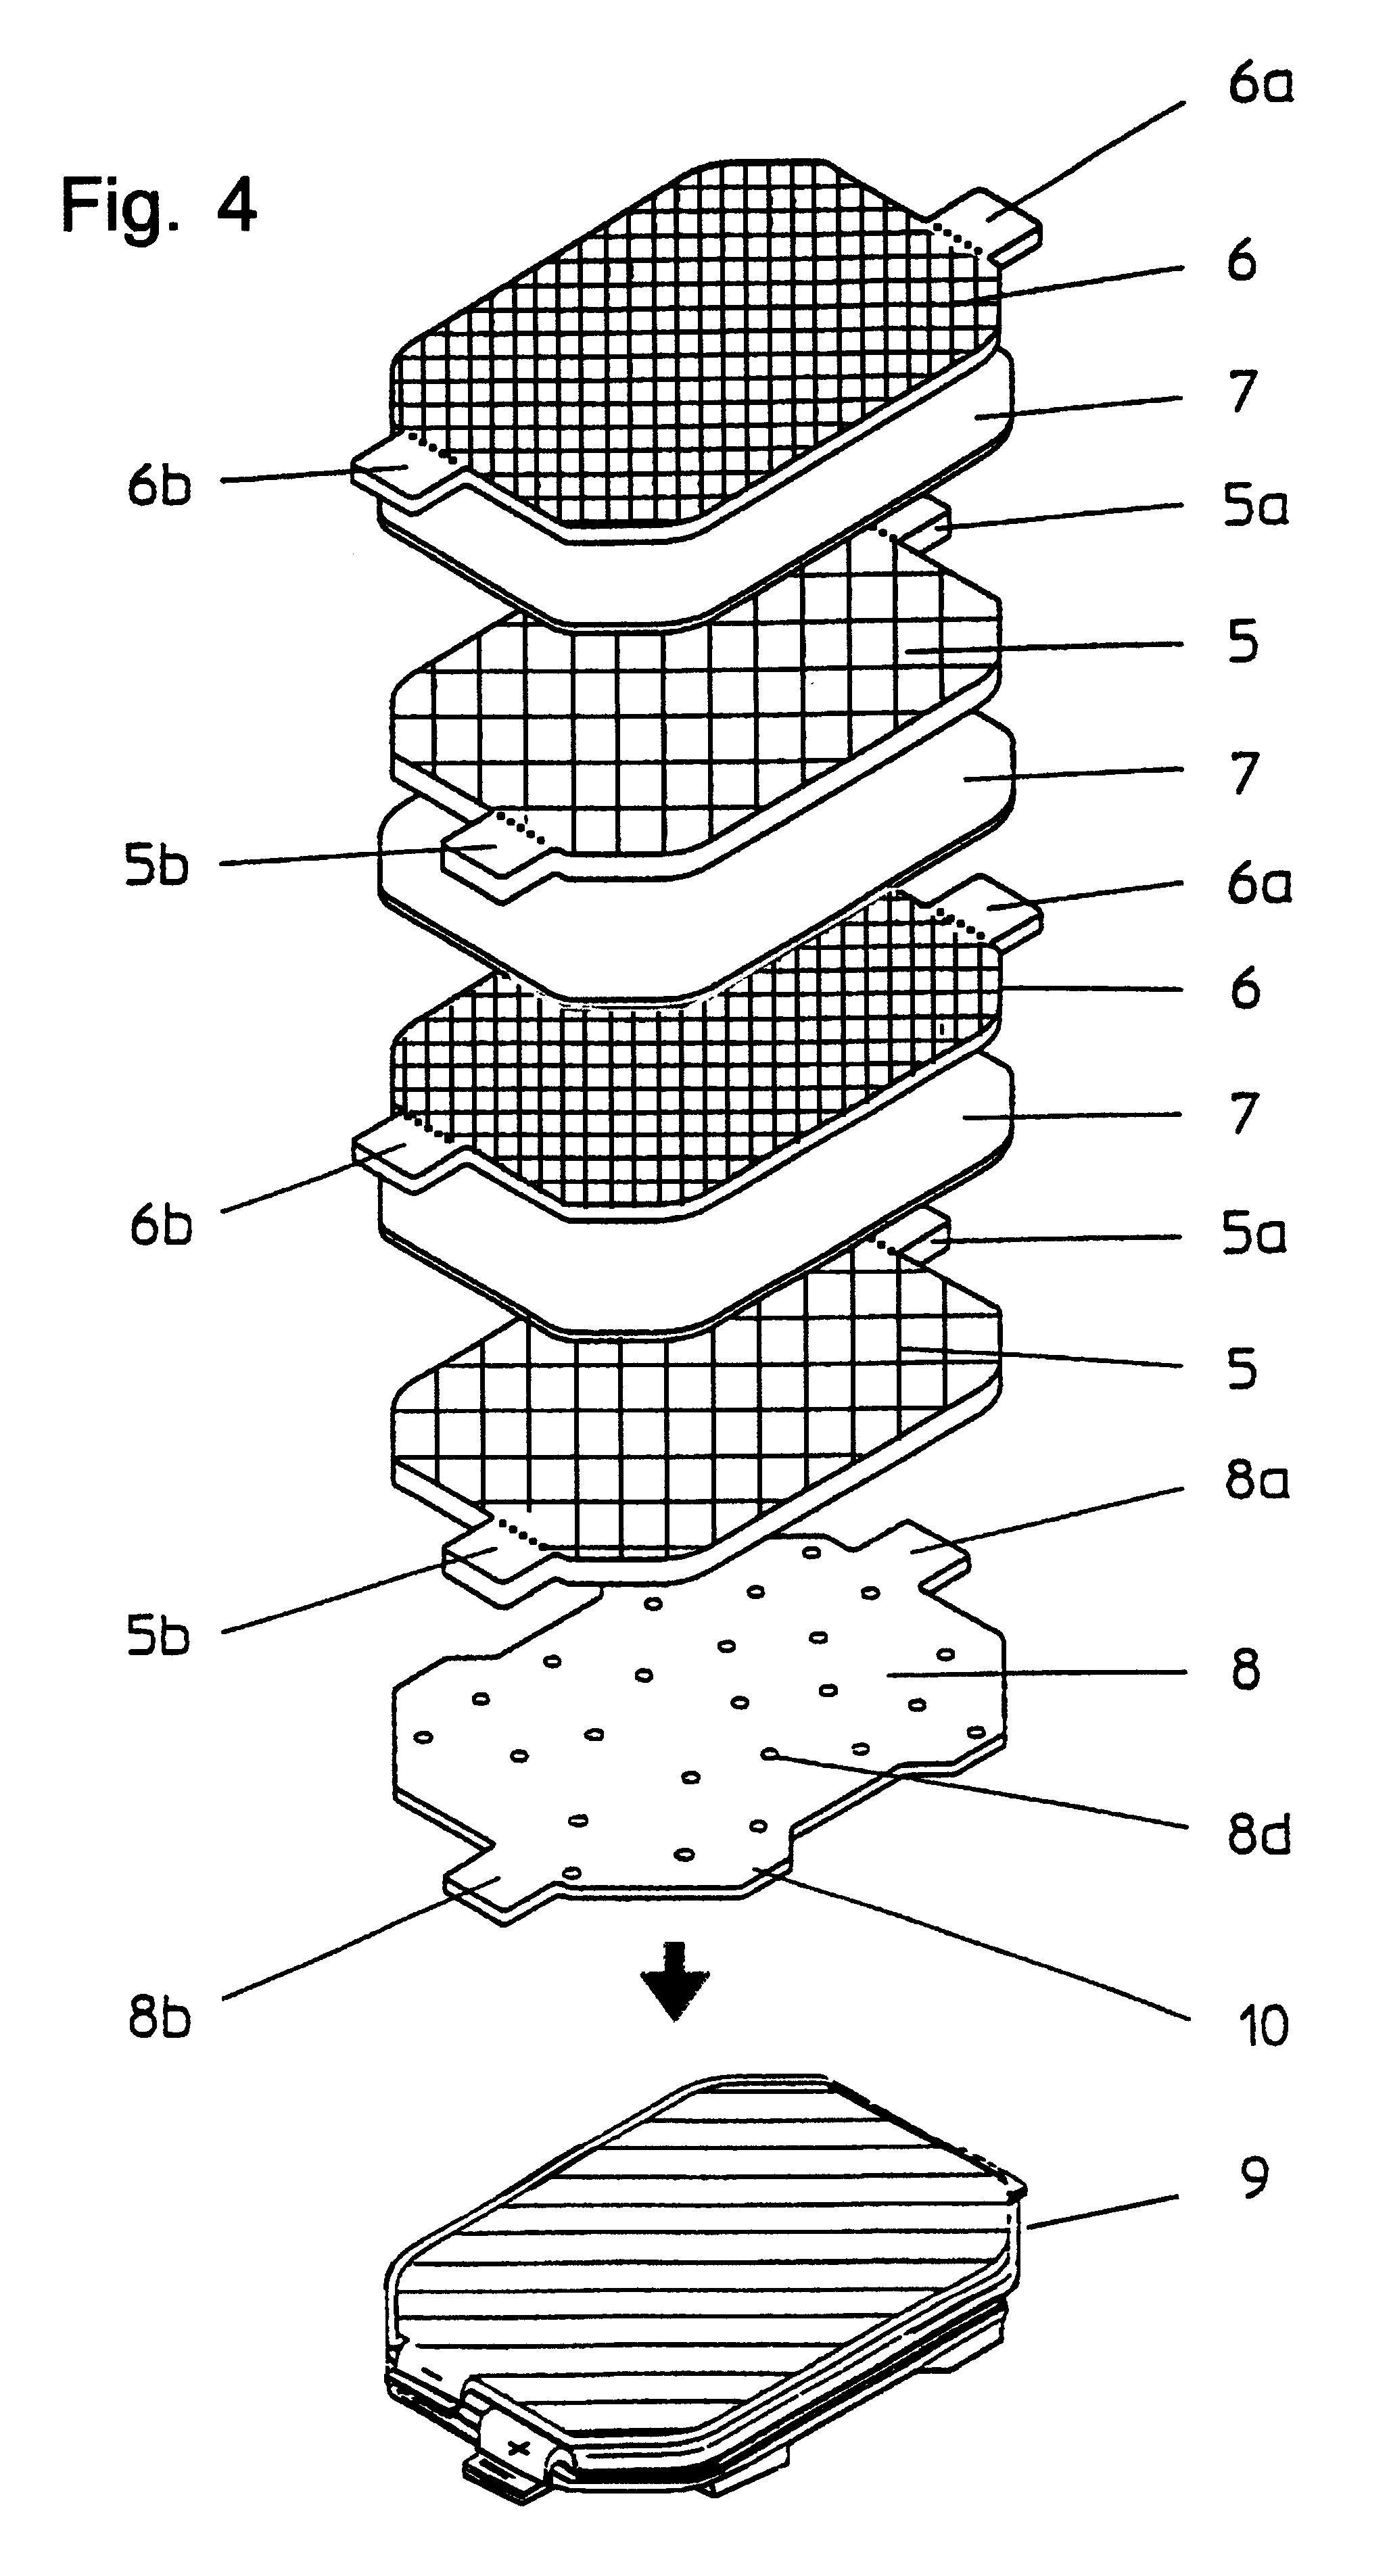 Electrical rechargeable battery in the form of a button cell